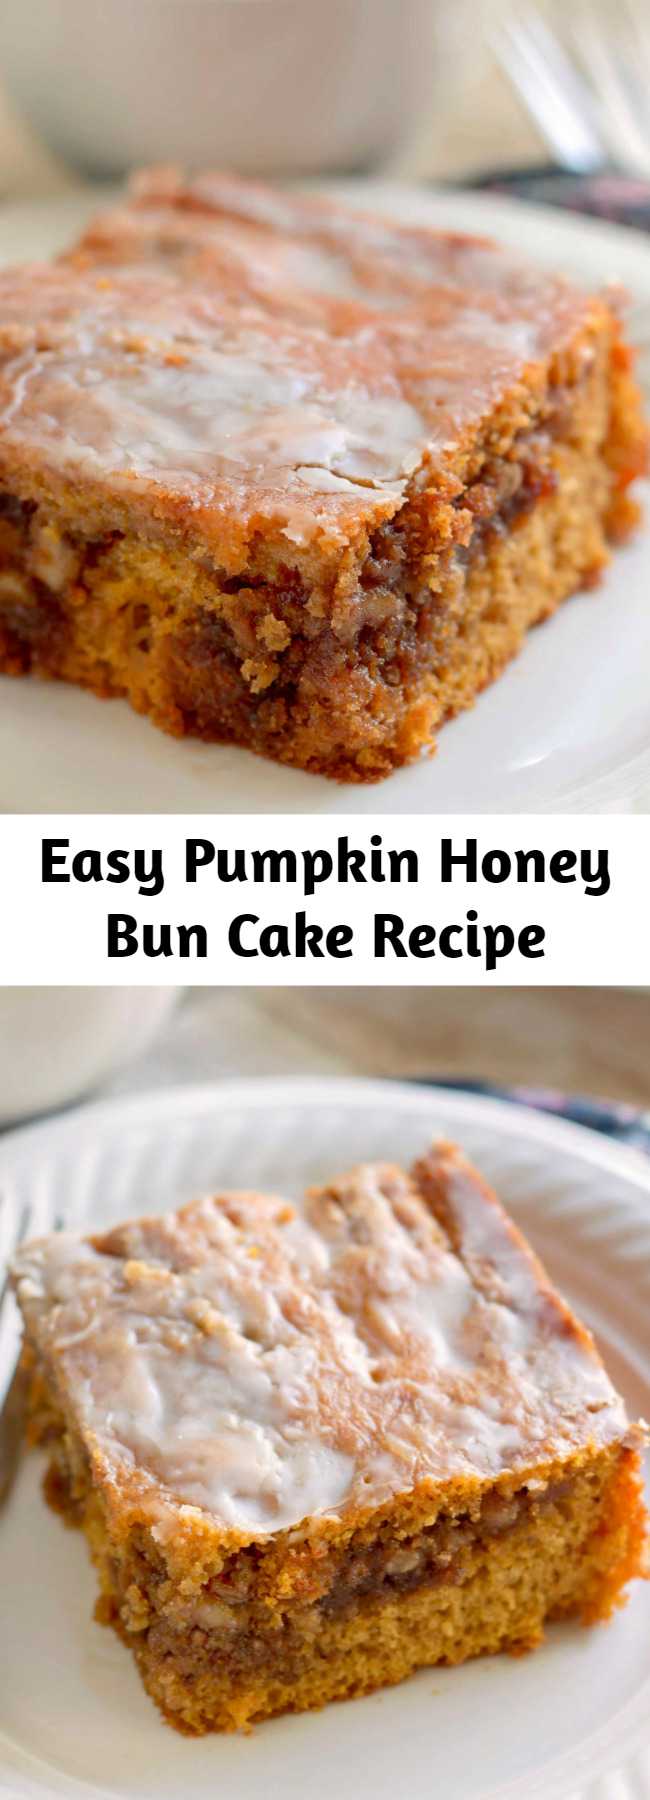 Easy Pumpkin Honey Bun Cake Recipe - A gooey brown sugar and walnut filling in the center of a moist pumpkin cake topped with a simple glaze.